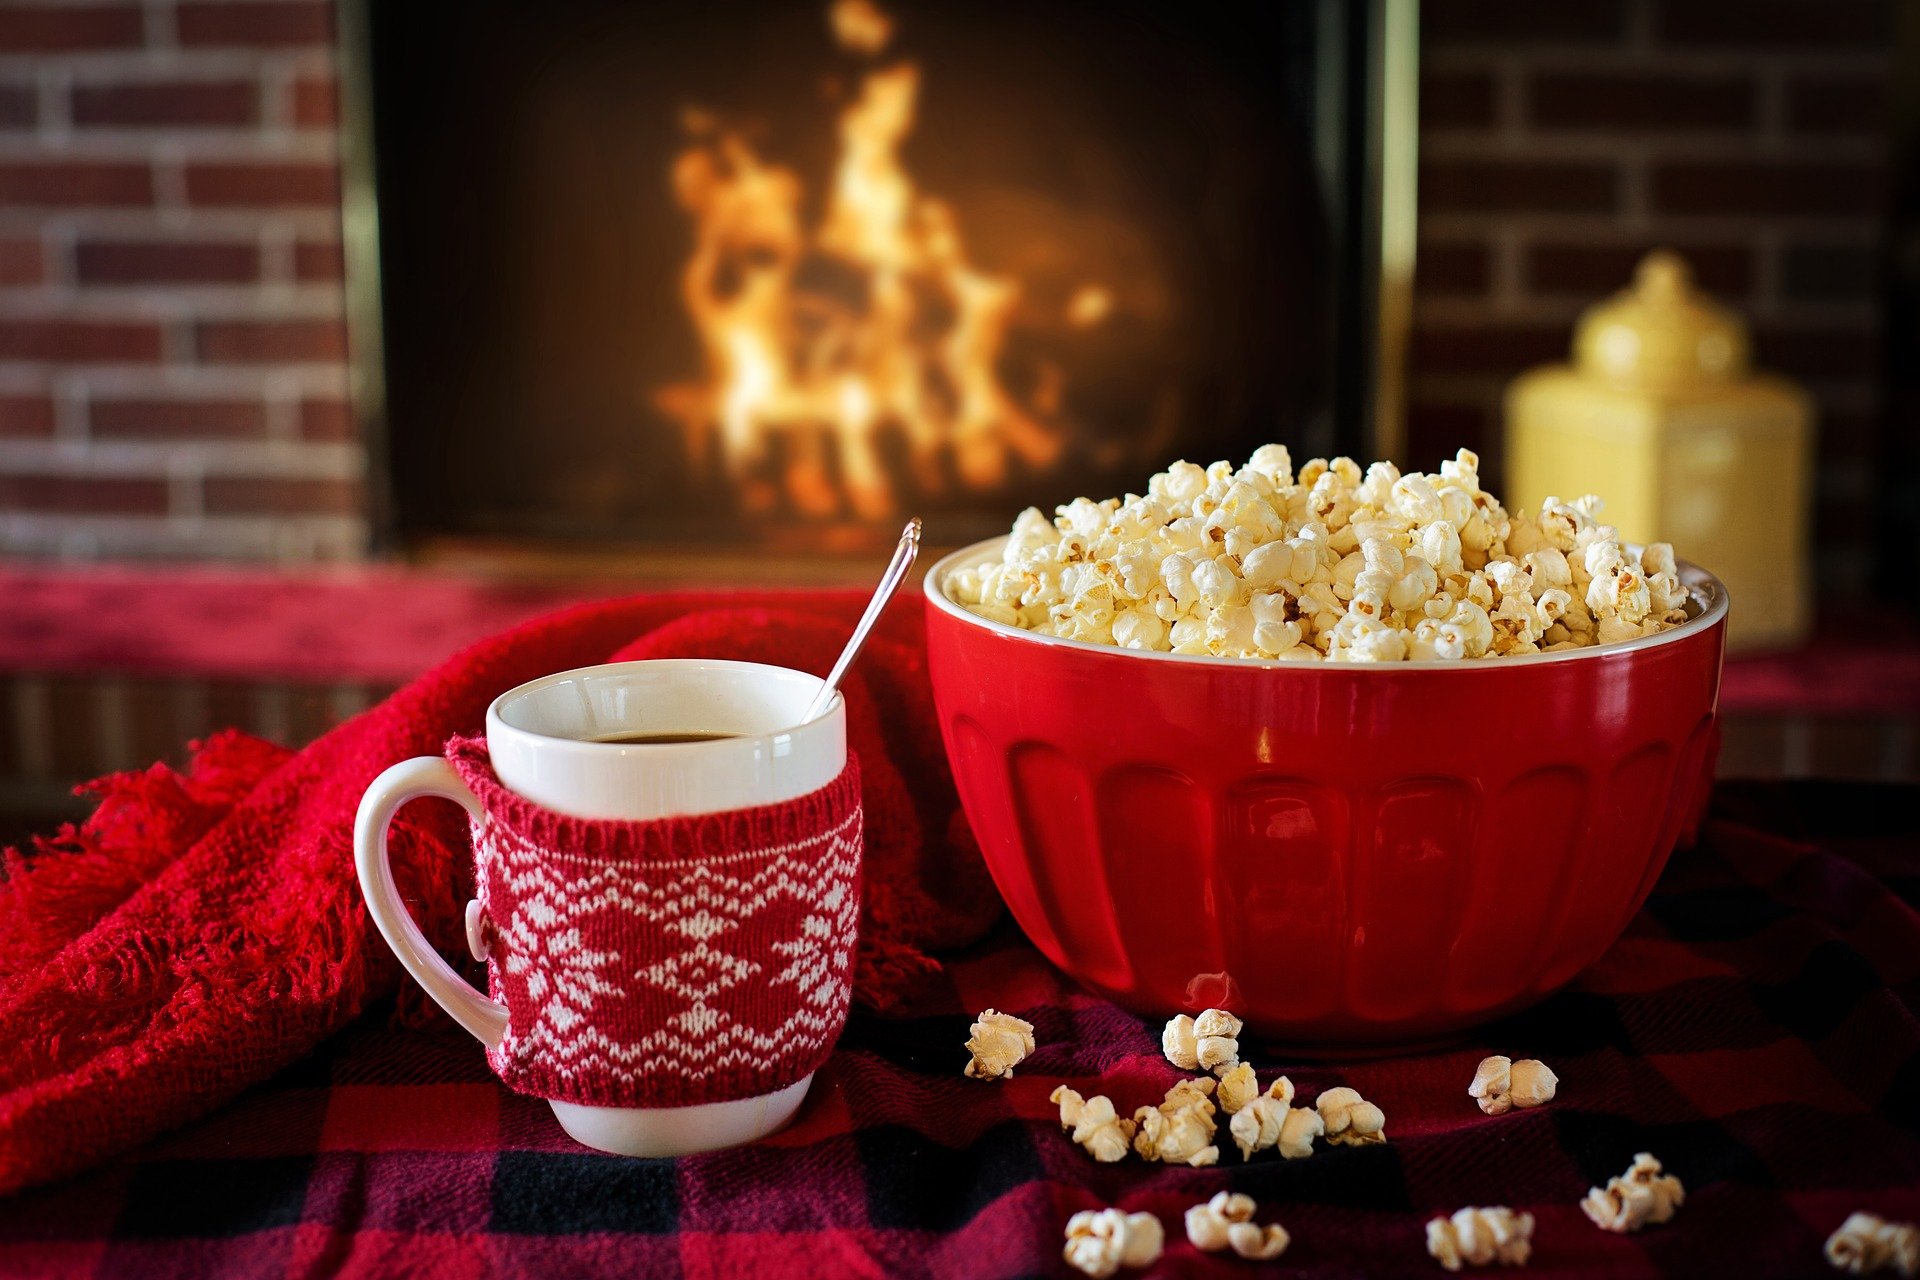 Hot cocoa and popcorn in front of a fireplace